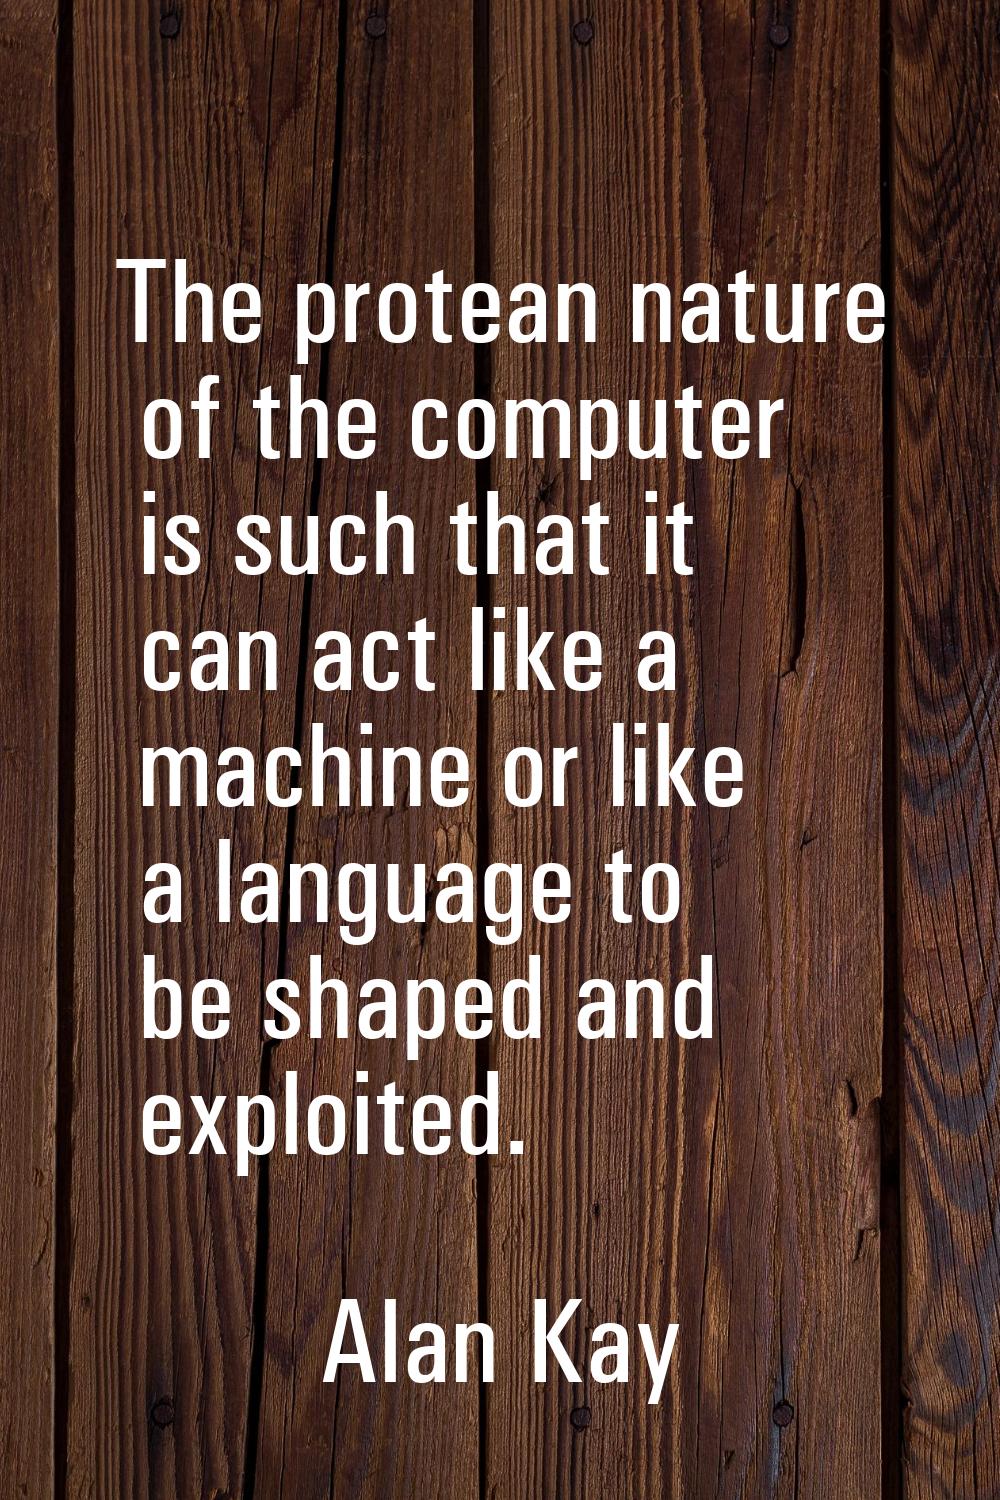 The protean nature of the computer is such that it can act like a machine or like a language to be 